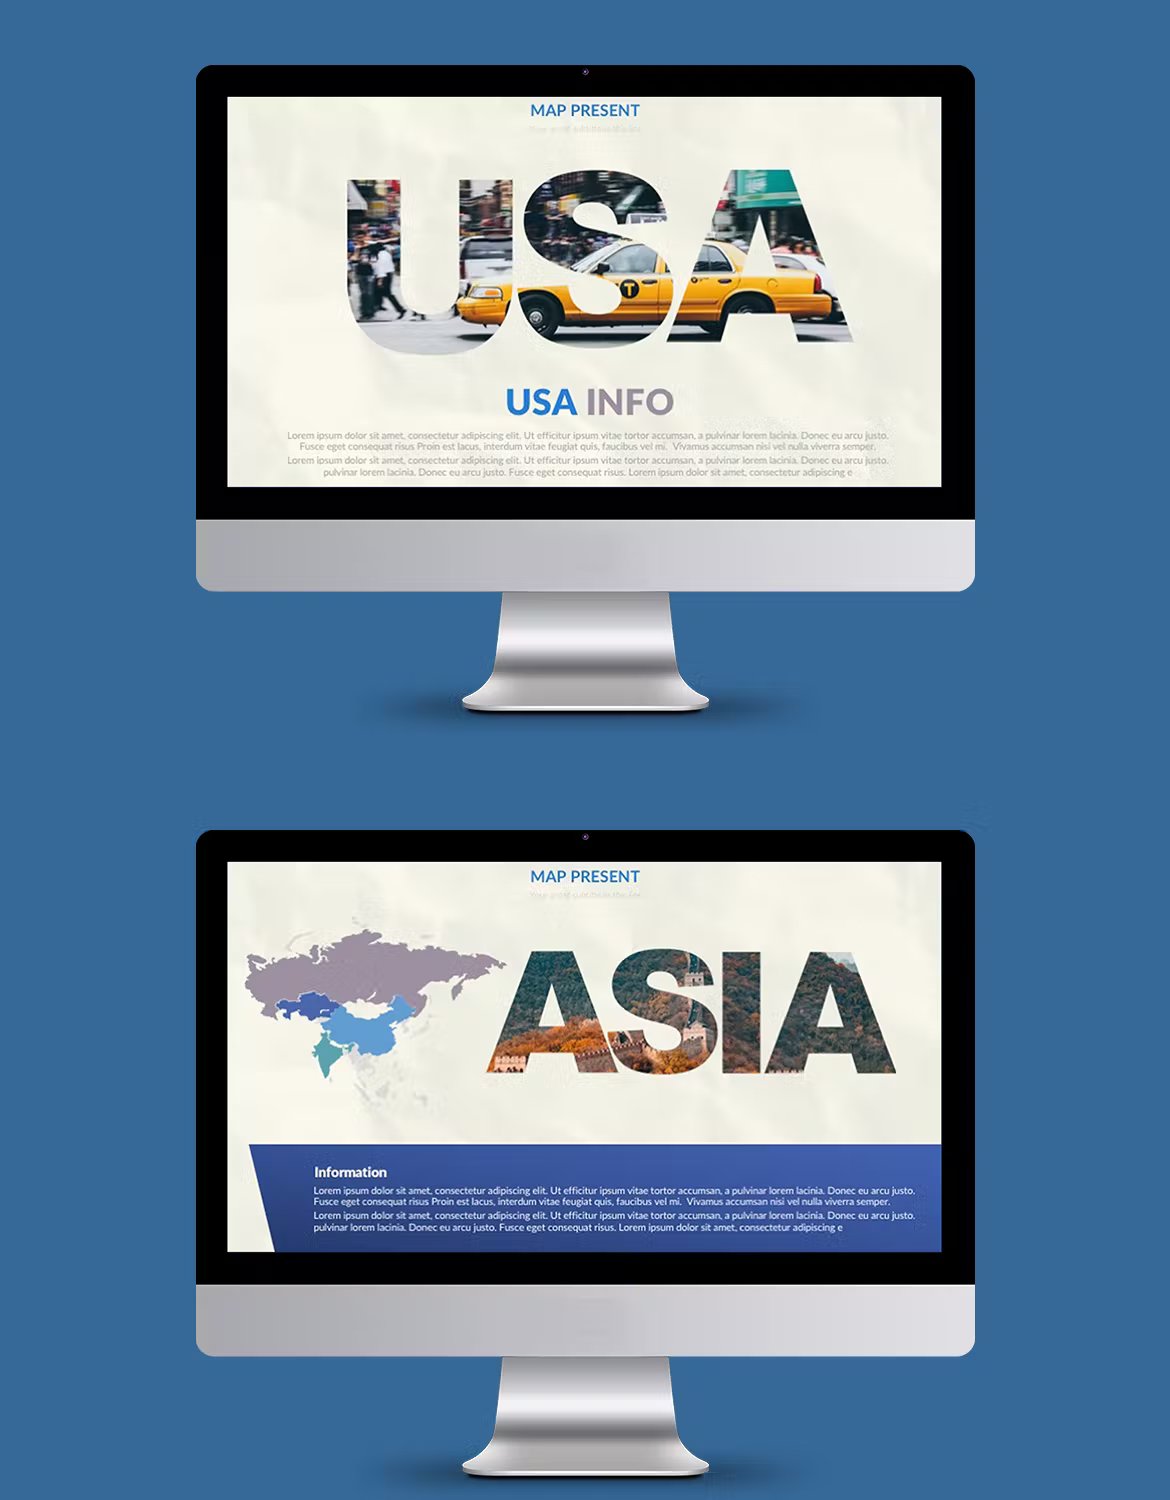 2 IMac mockups with different assign powerpoint templates on a blue background.